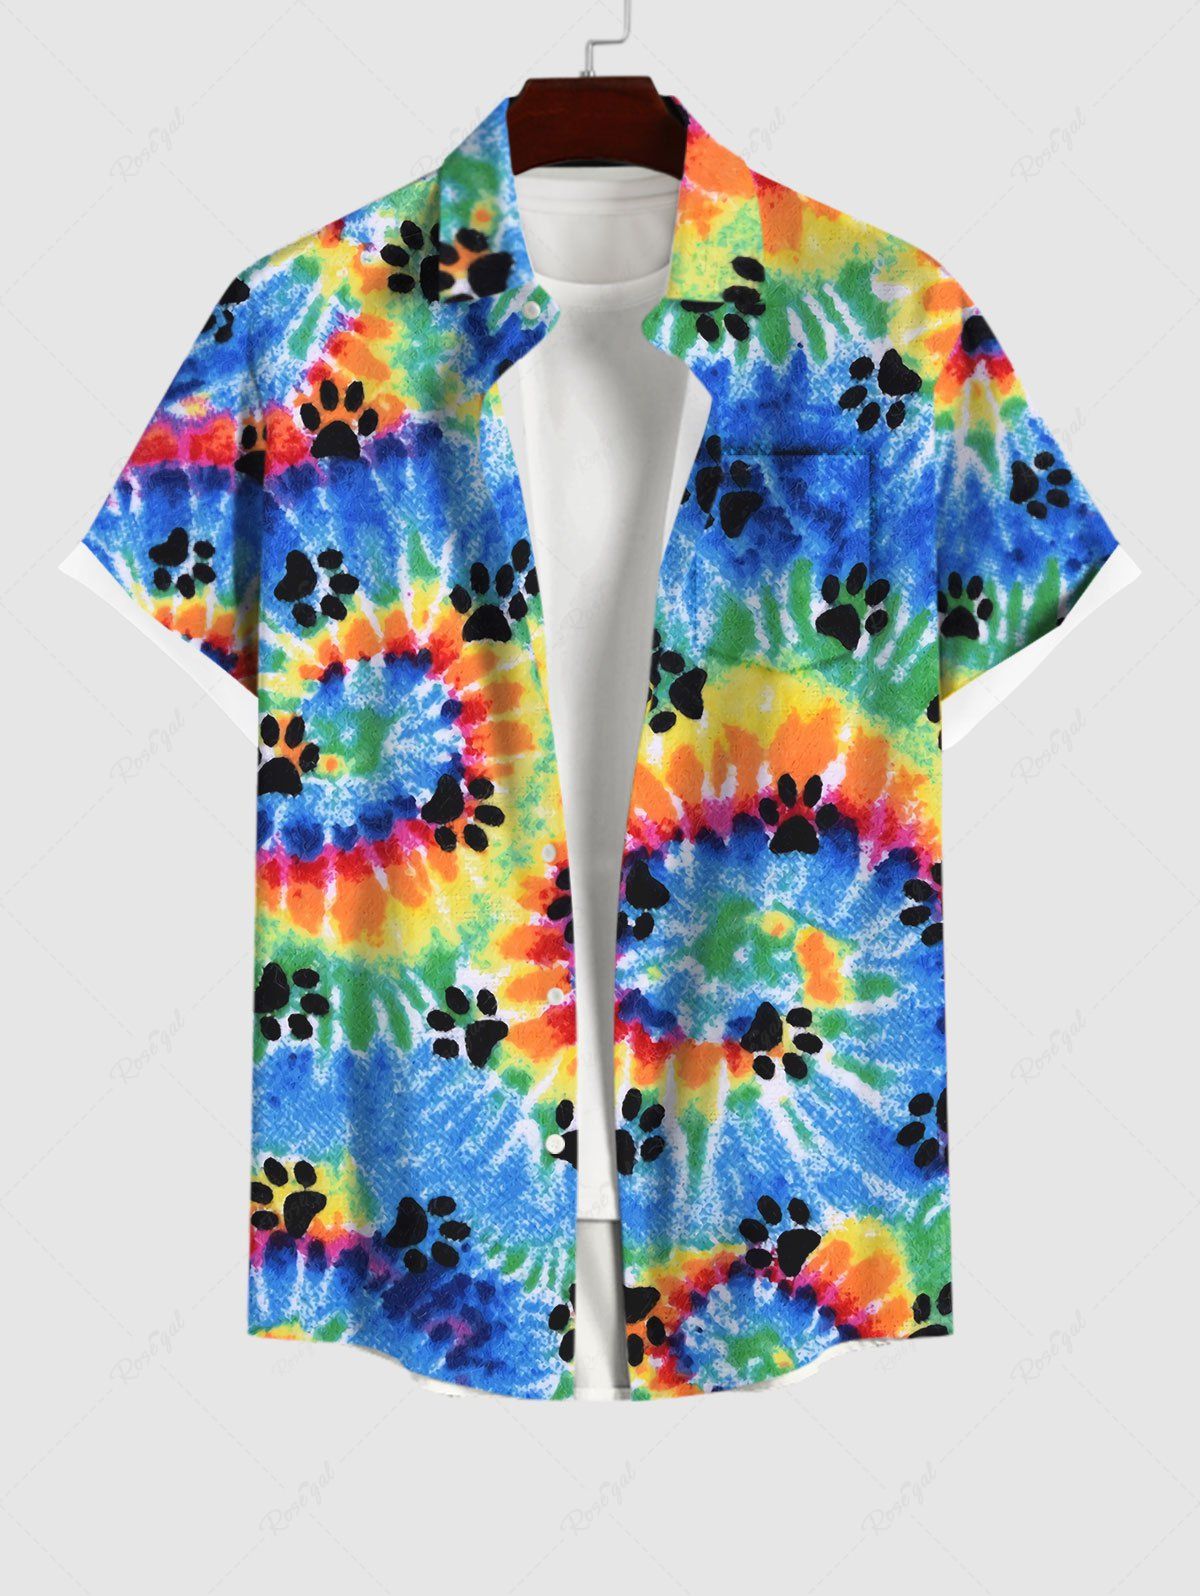 Hawaii Plus Size Turn-down Collar Spiral Watercolor Tie Dye Cat Paw Print Buttons Pocket Beach Shirt For Men Multi-A S